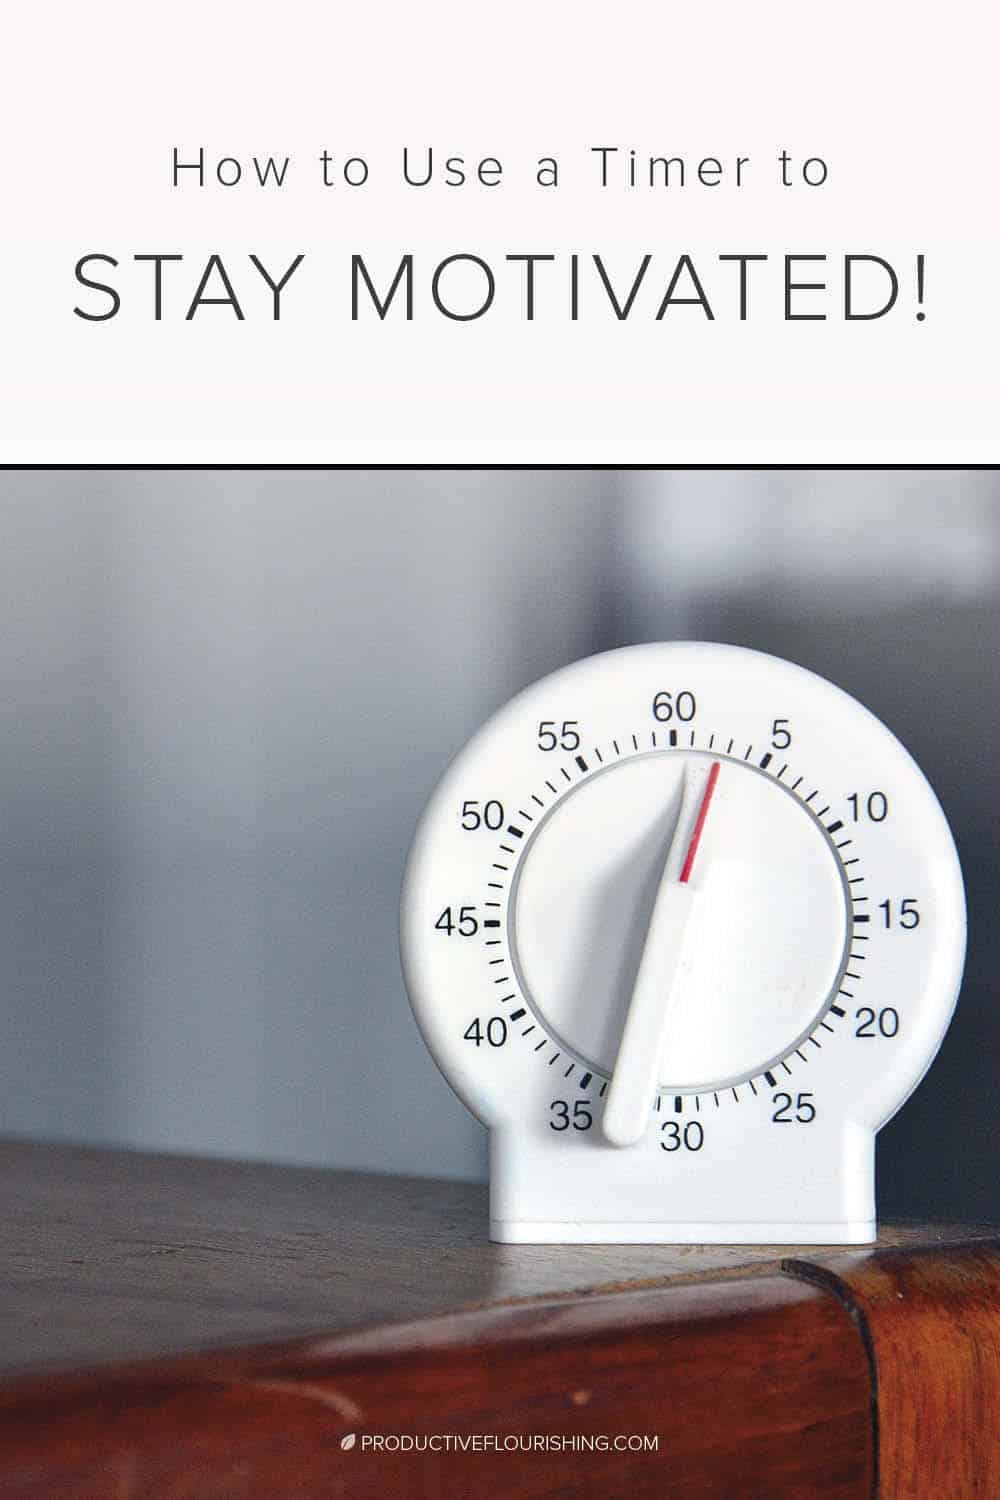 6 ways to stay motivated using a plain old egg timer. Learn the best tips and ideas for staying productive and motivated as a creative entrepreneur. #motivation #productivity #productiveflourishing